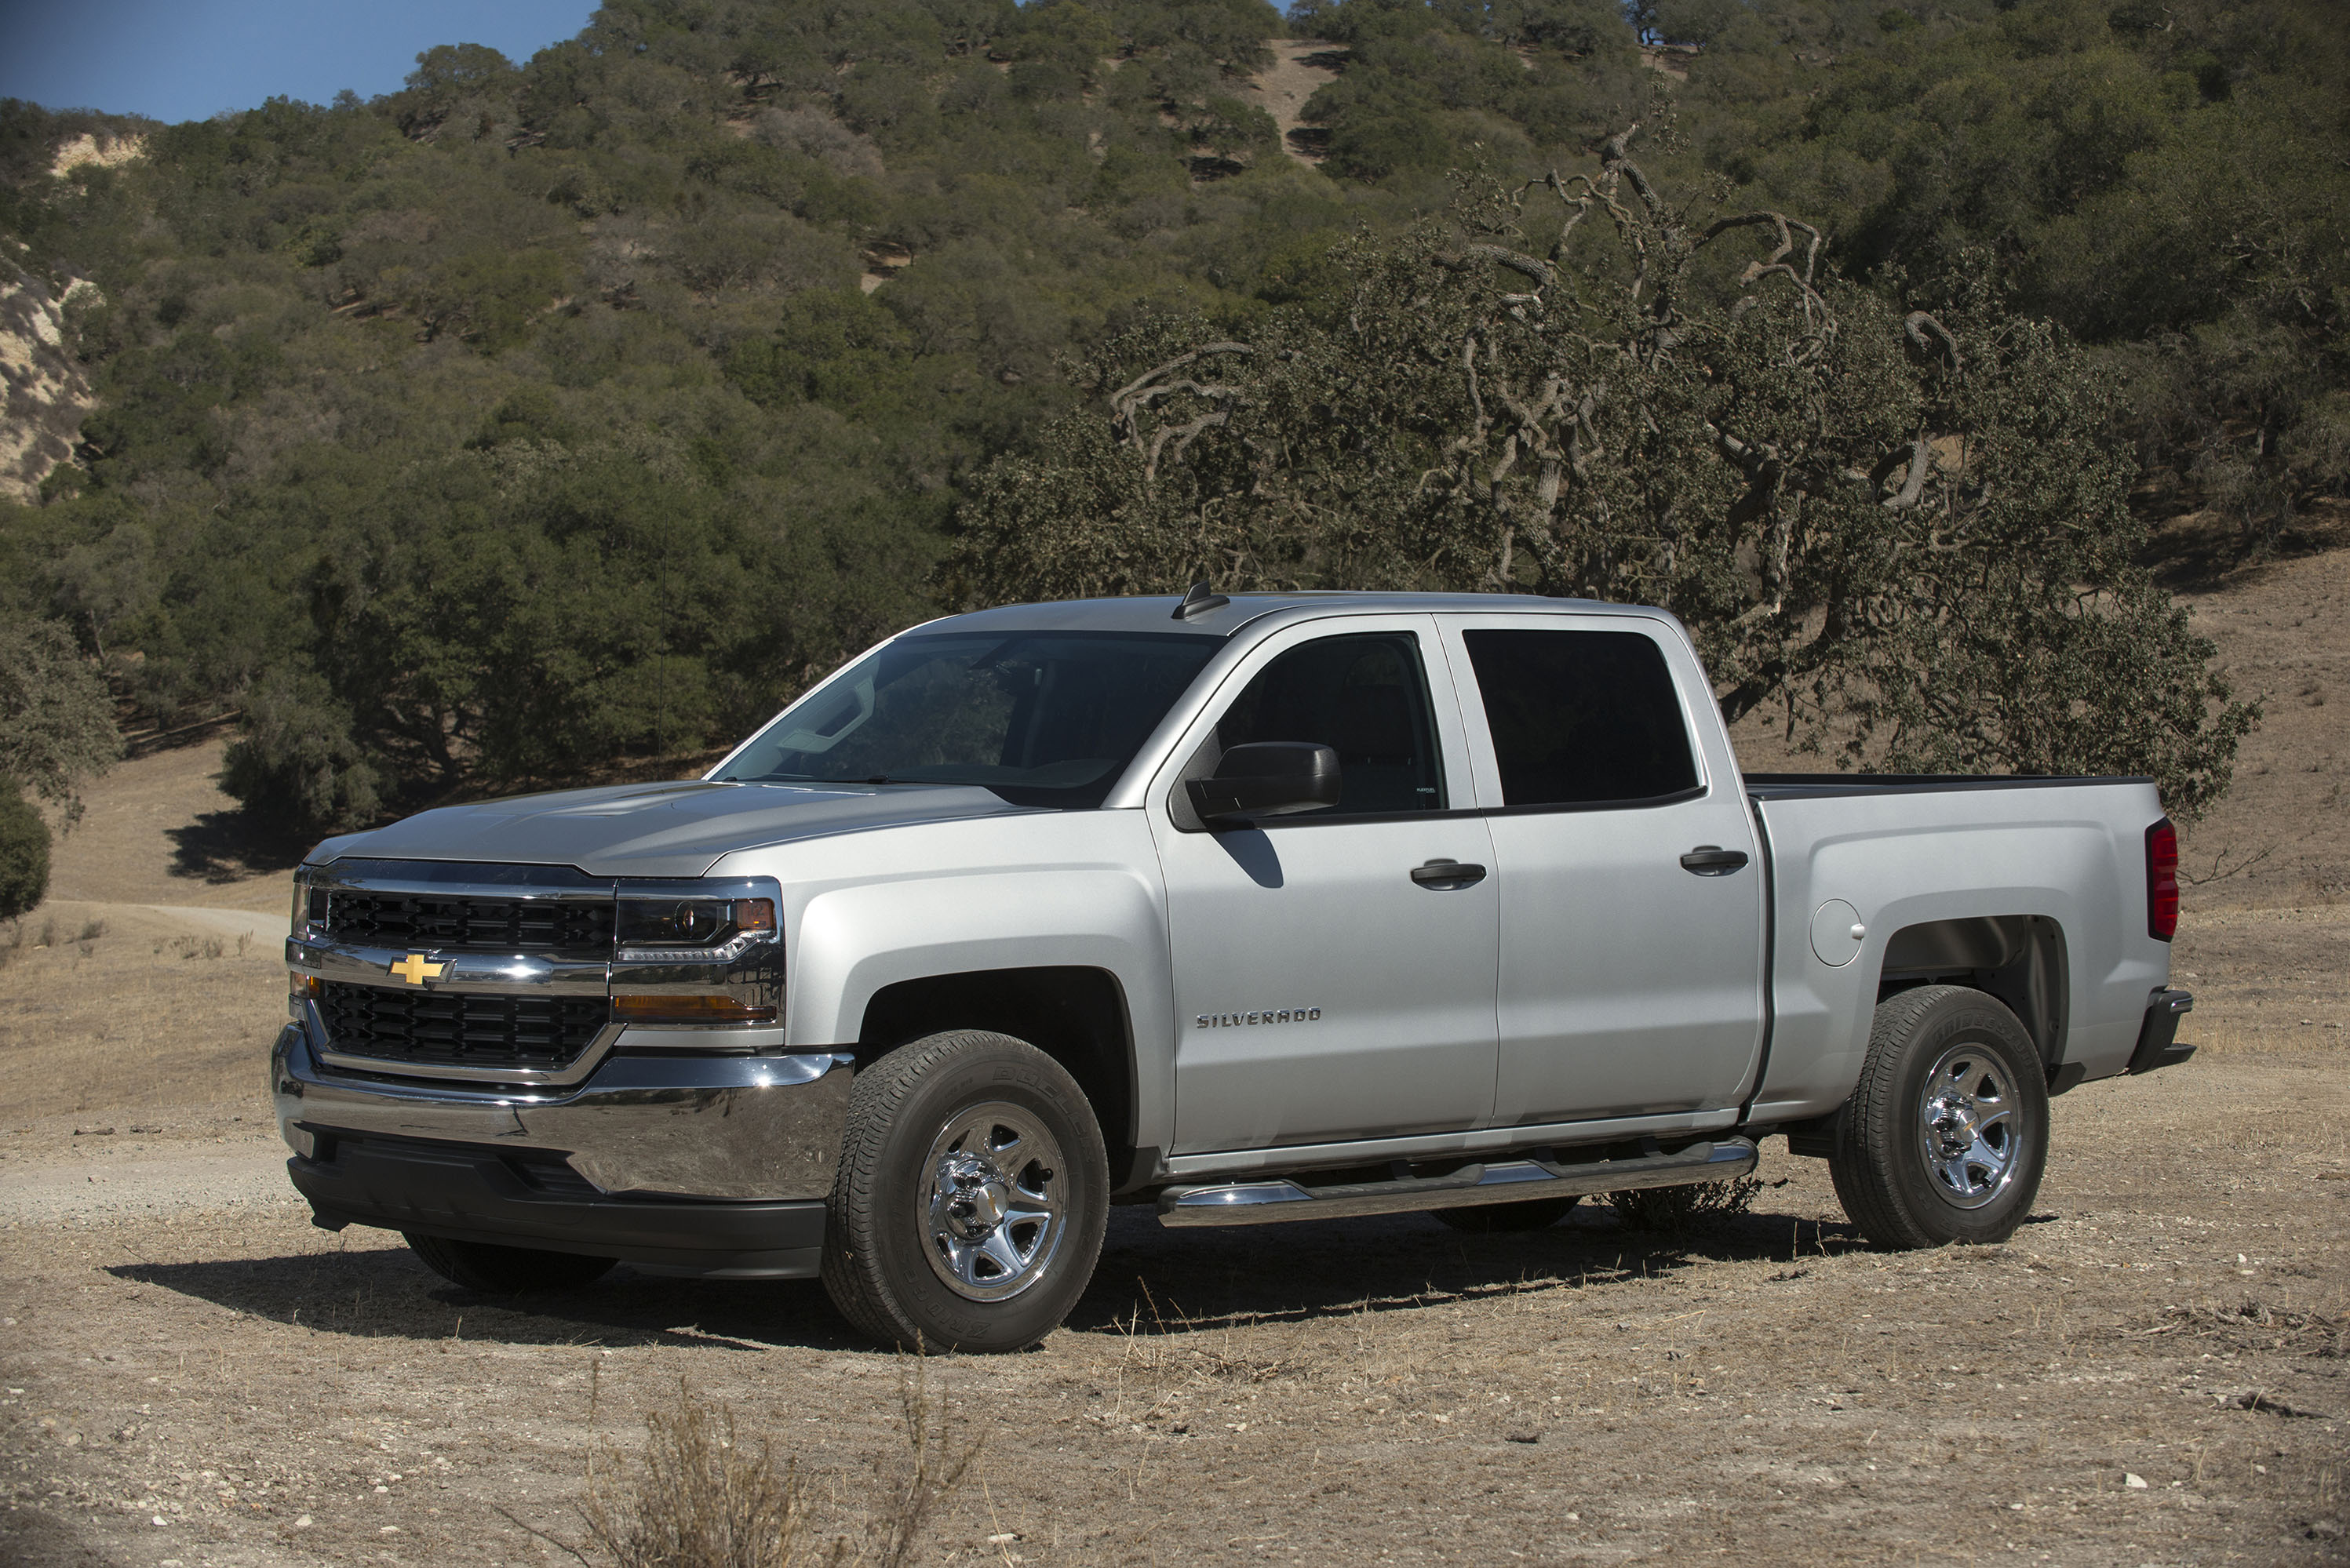 2018 Chevrolet Silverado 1500 (Chevy) Review, Ratings, Specs, Prices